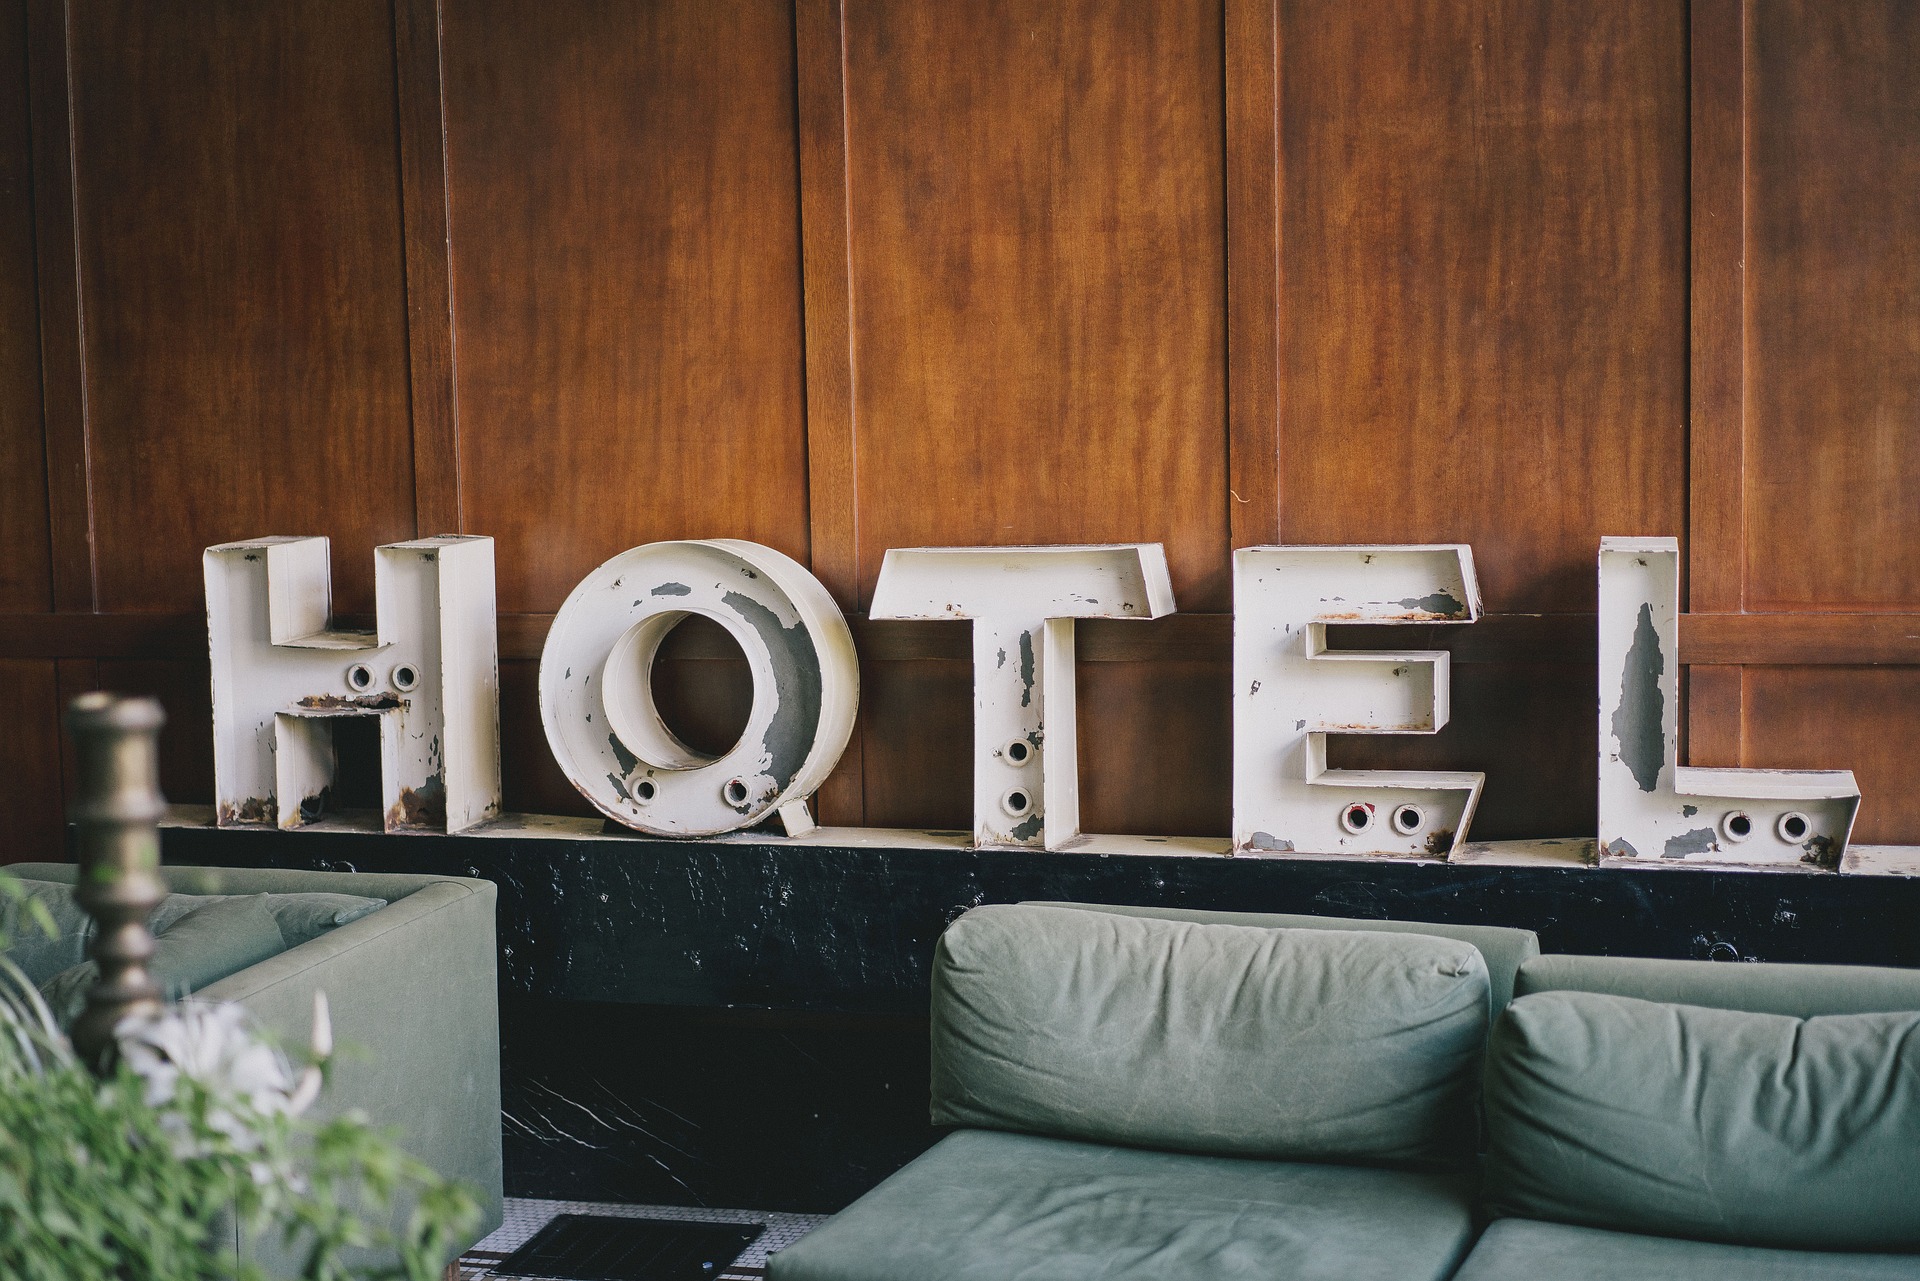 metal letters spelling out hotel in hotel lobby